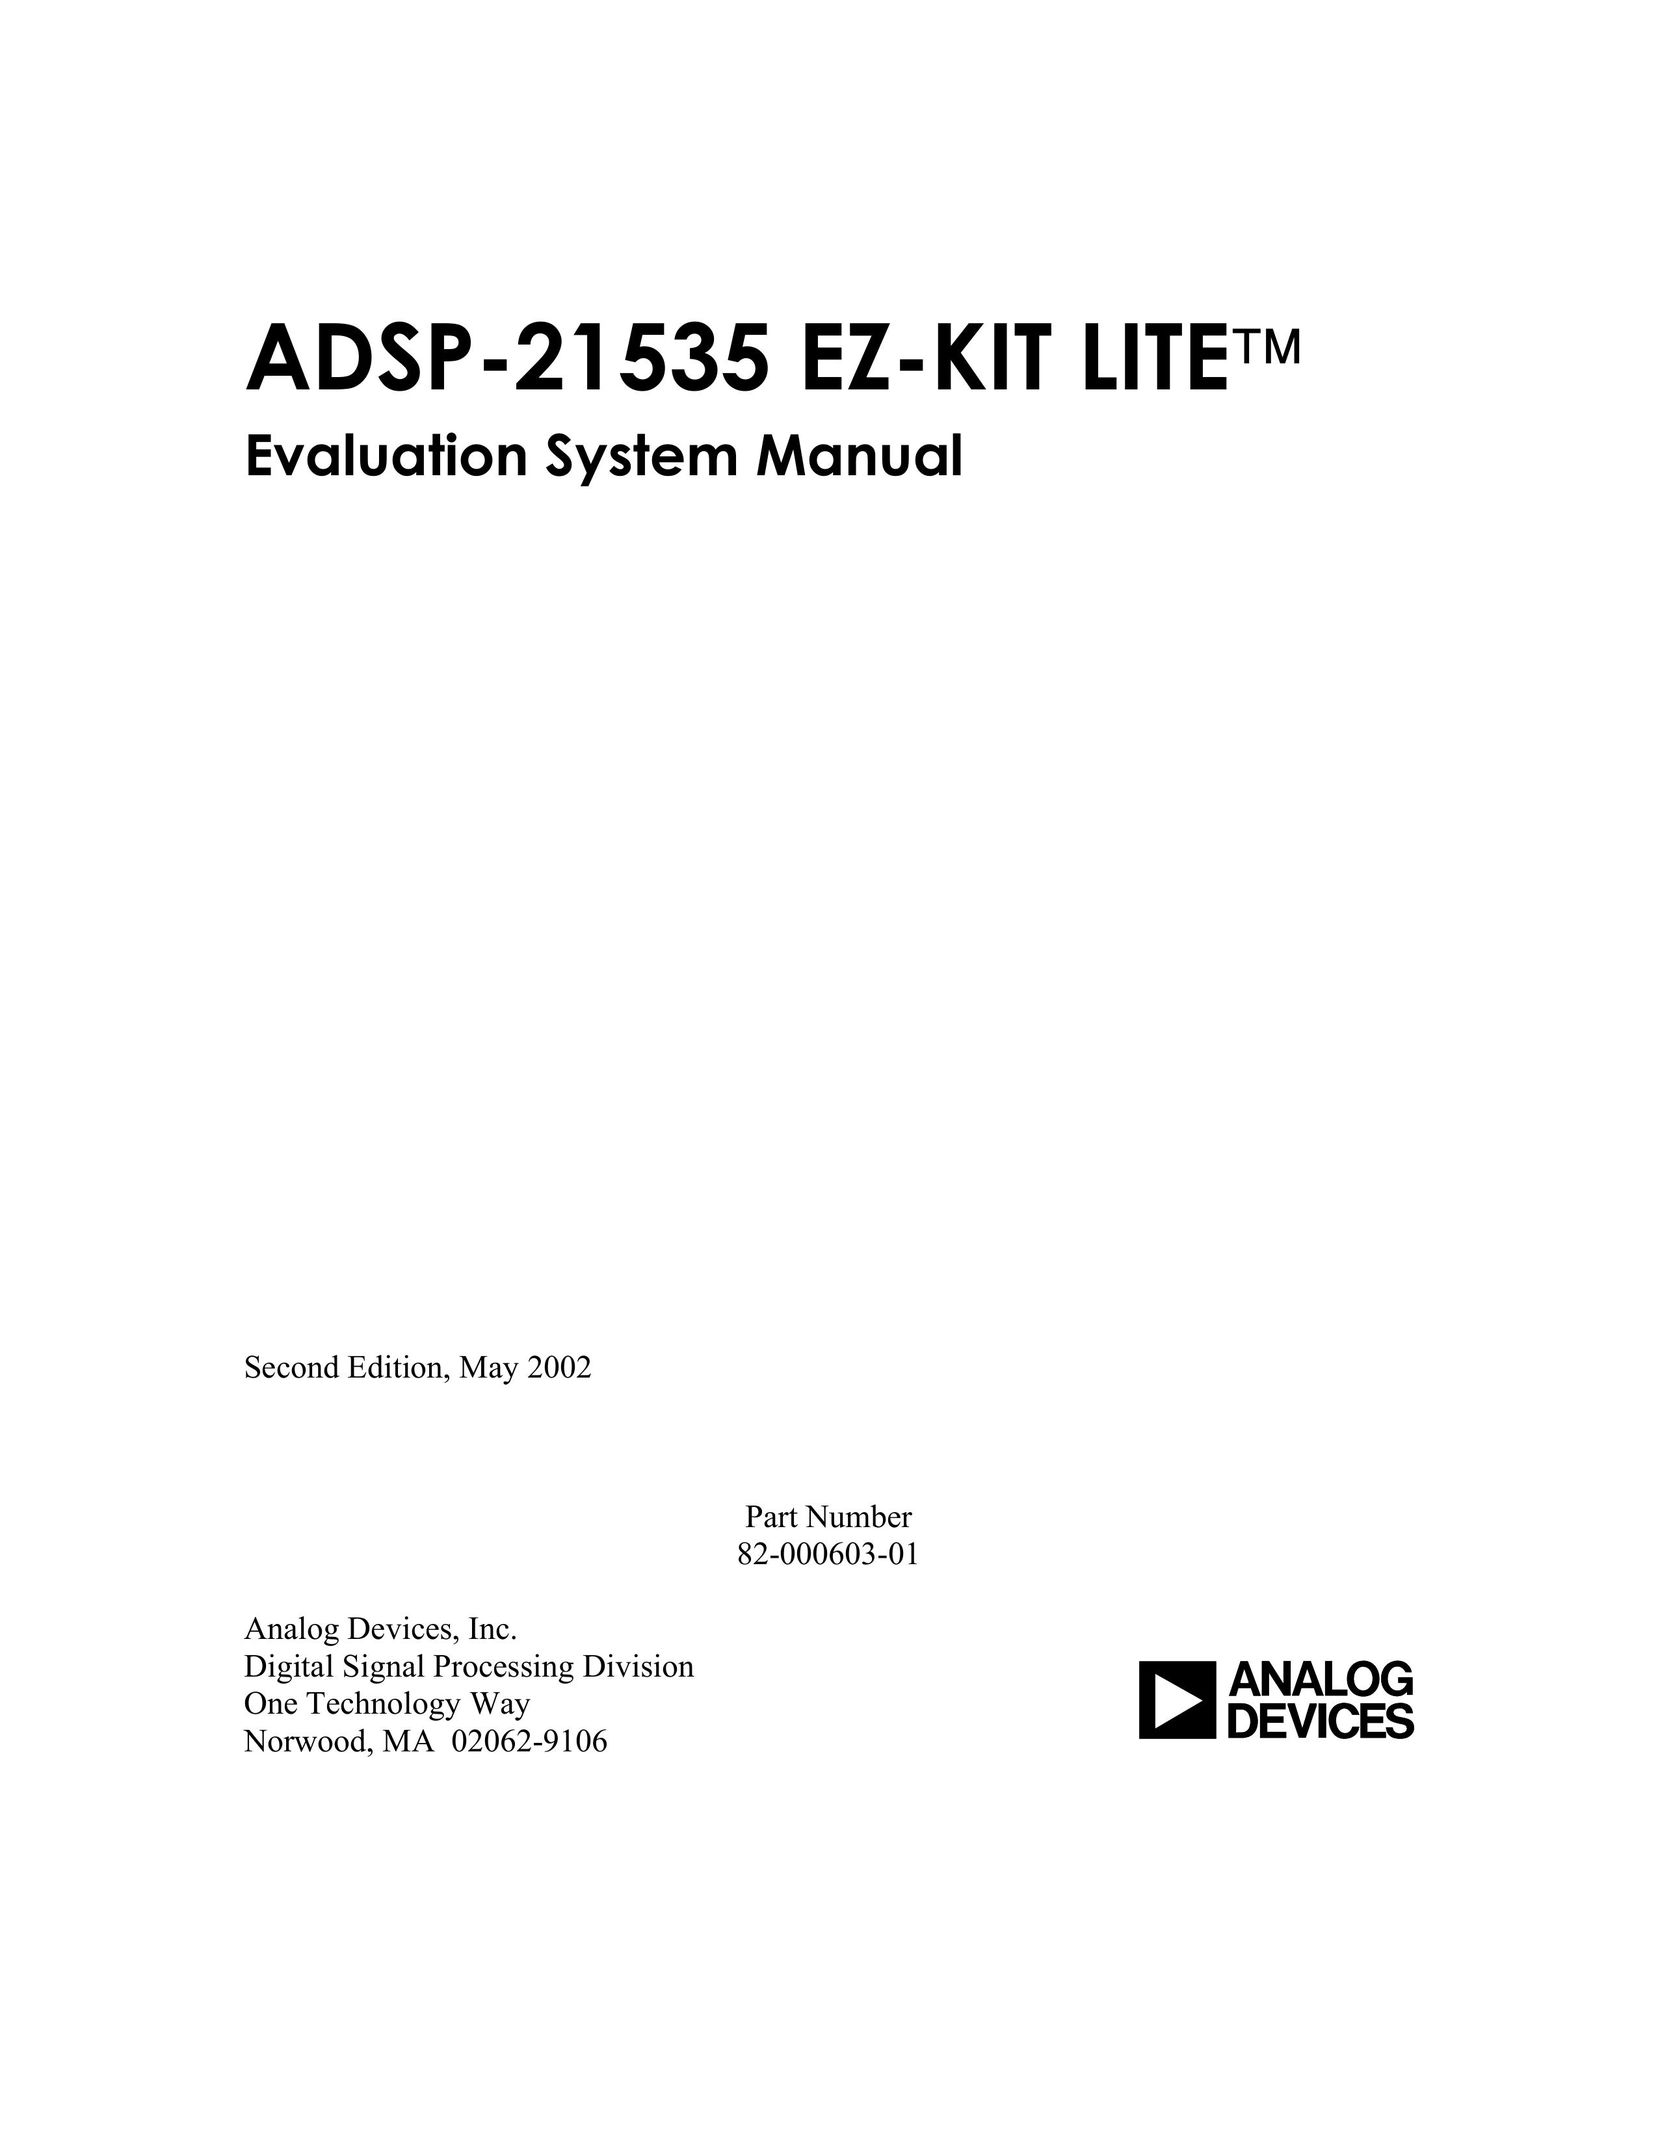 Analog Devices 82-0000603-01 Computer Hardware User Manual